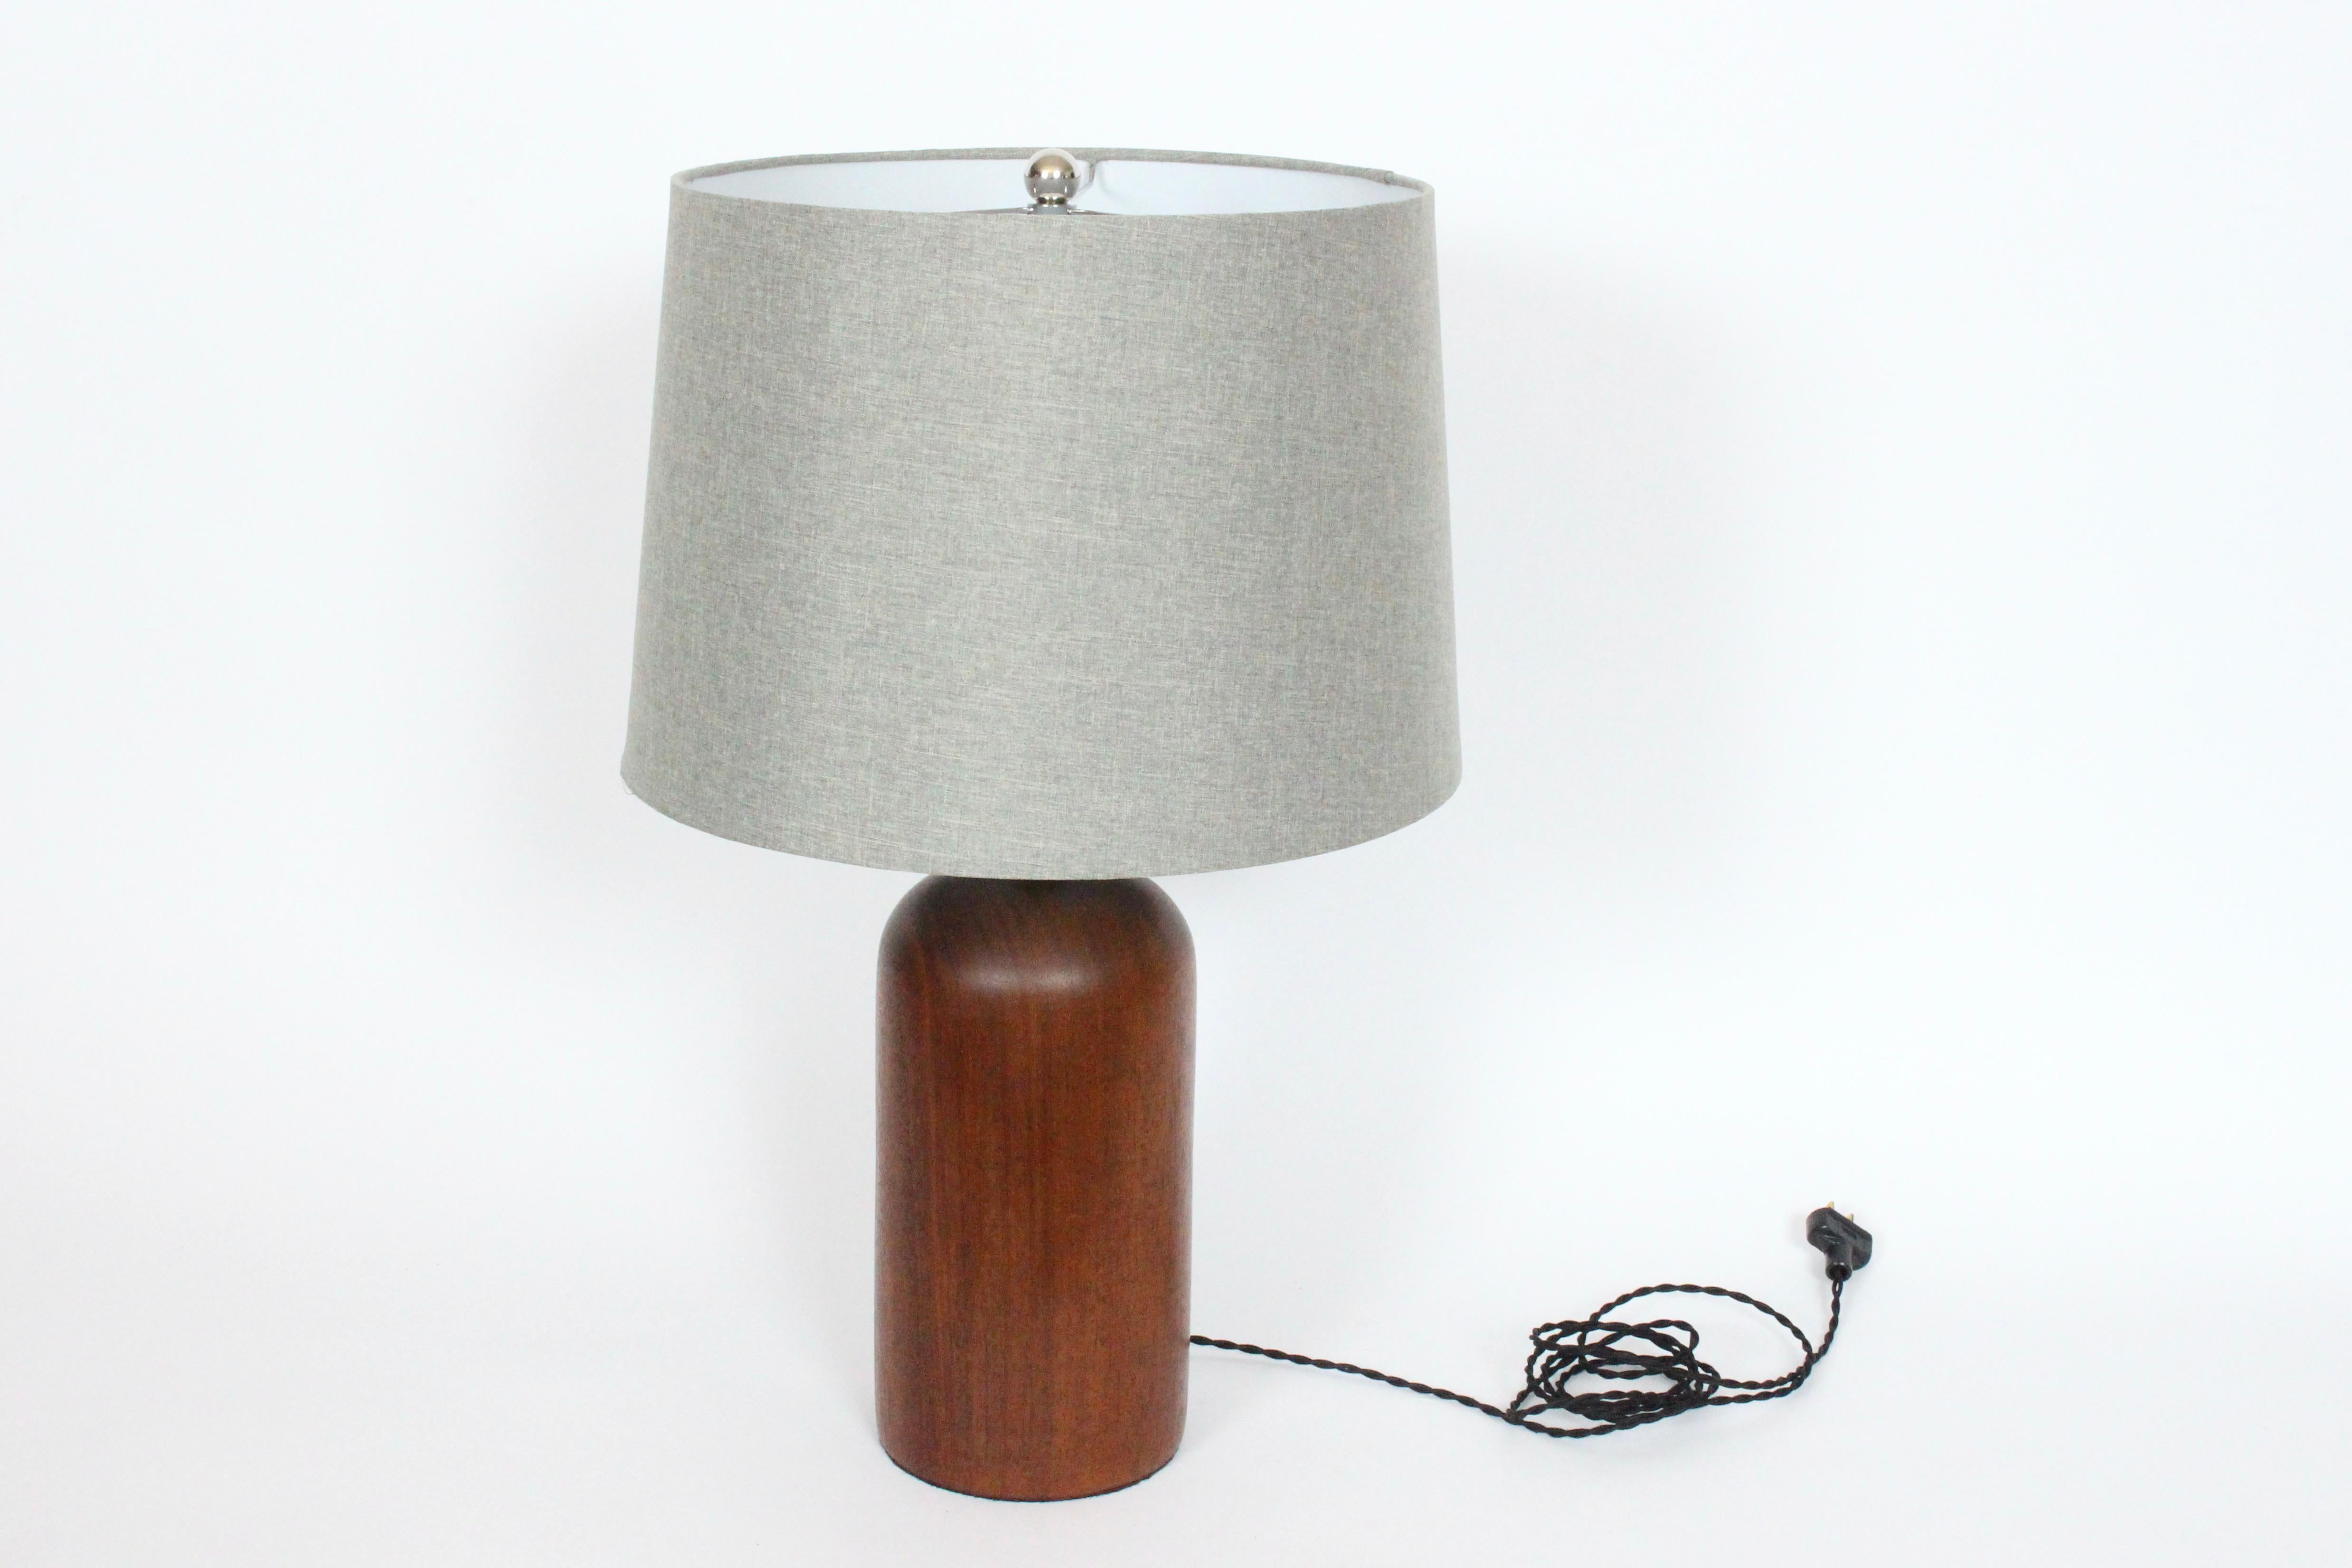 Danish Mid Century Modern Rounded Solid Dark Teak Table Lamp, 1960's In Good Condition For Sale In Bainbridge, NY